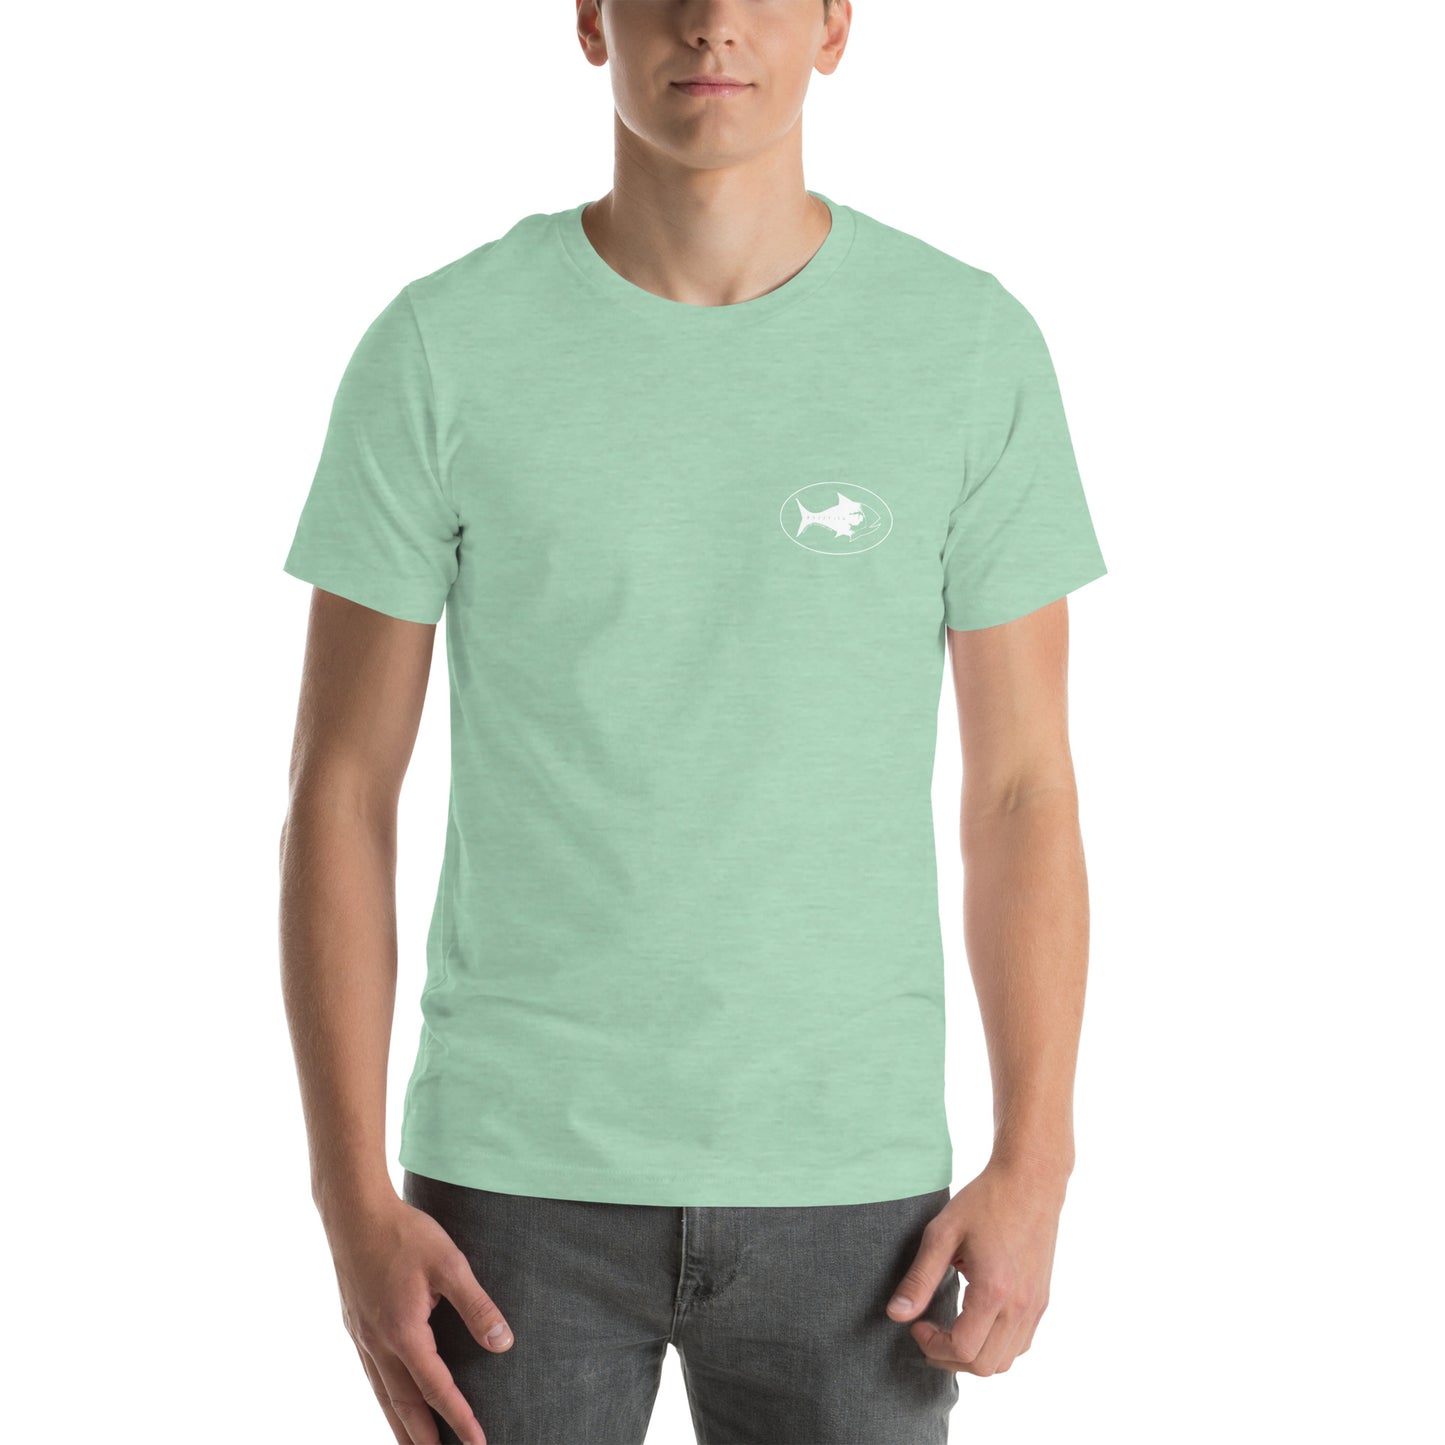 The Outfitters Soft and Light Tee